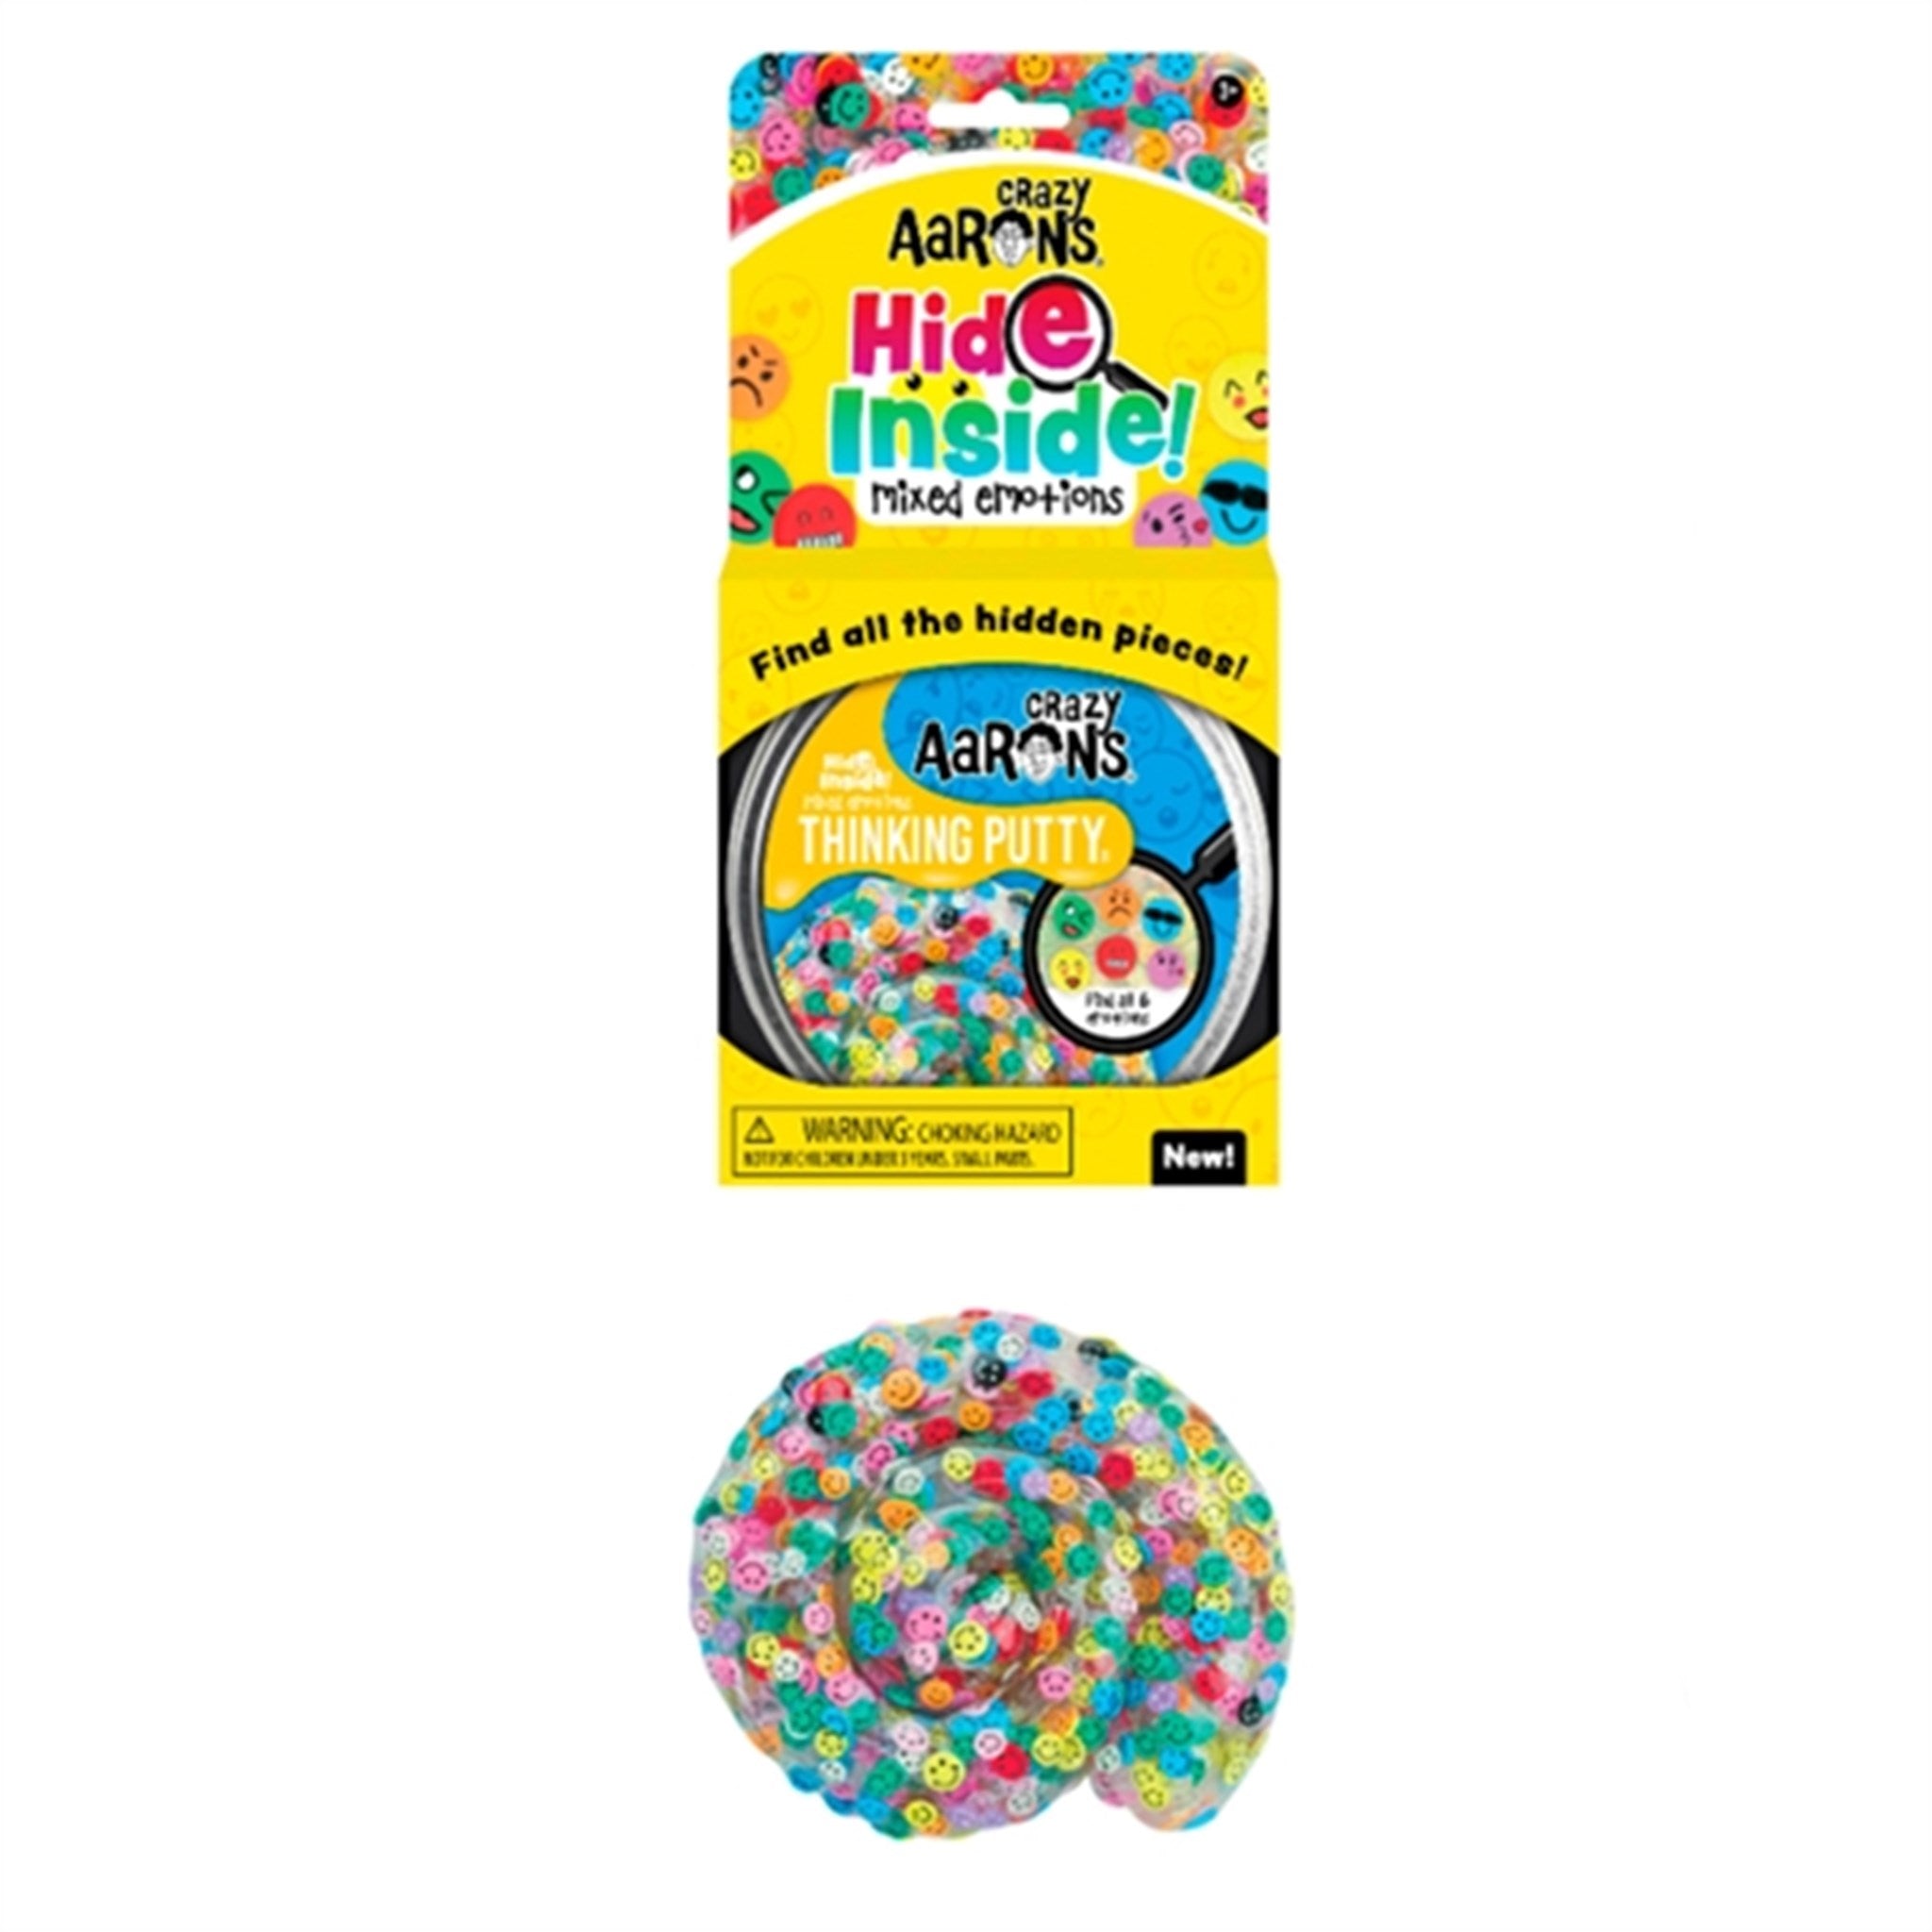 Crazy Aaron's® Thinking Putty Hide Inside! - Mixed Emotions